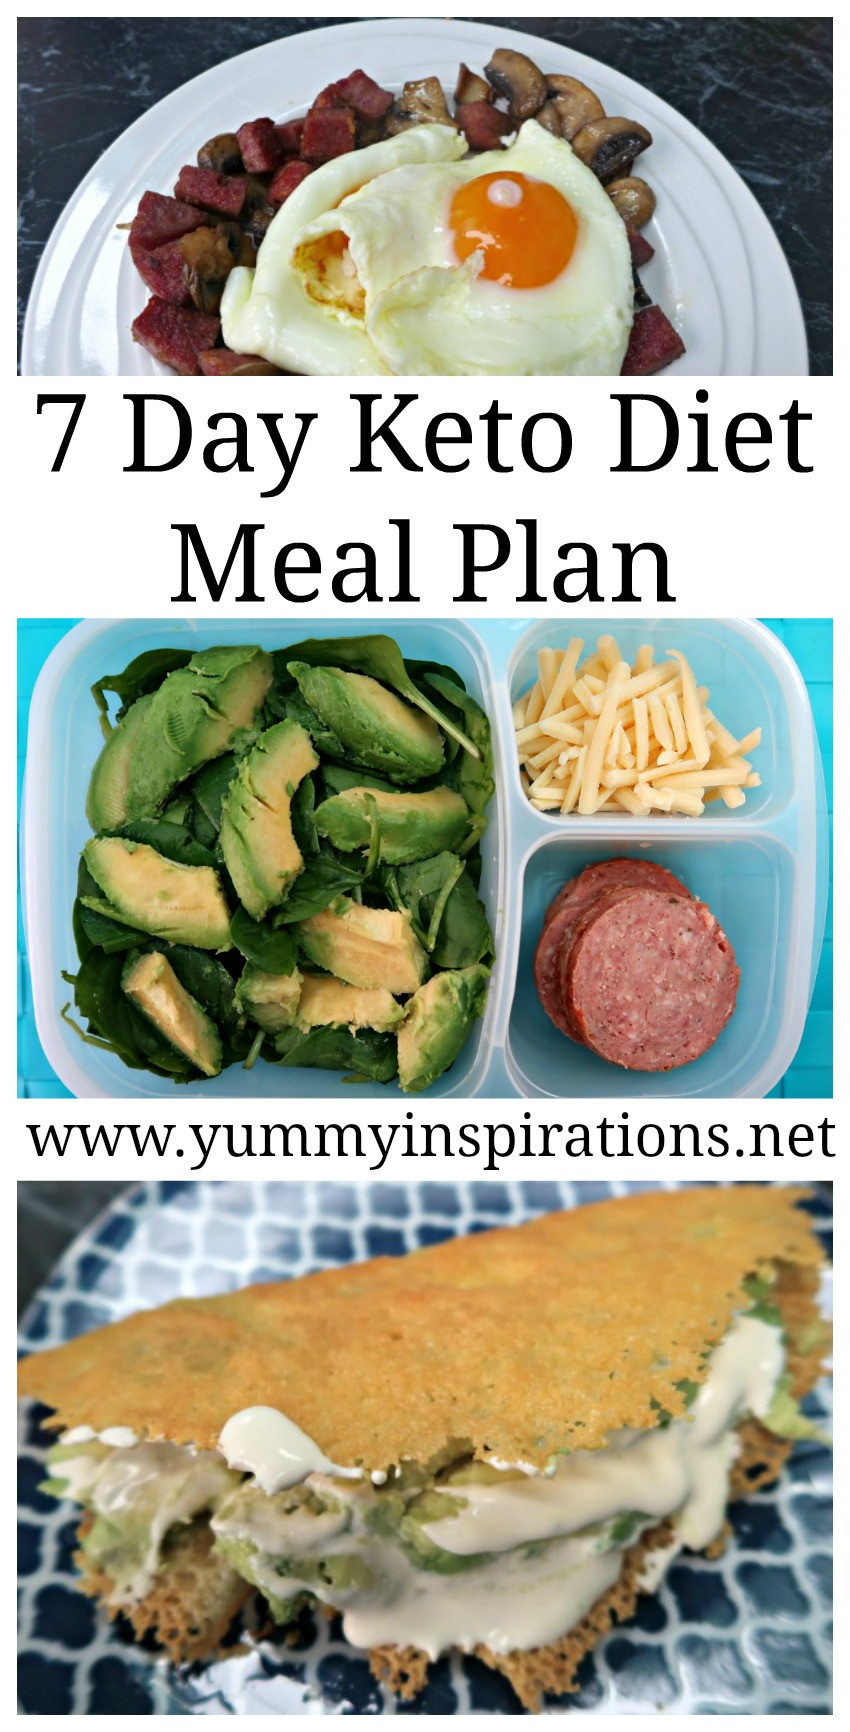 Low Carb Keto Diet Plan
 7 Day Keto Diet Meal Plan Menu For Weight Loss Ketogenic